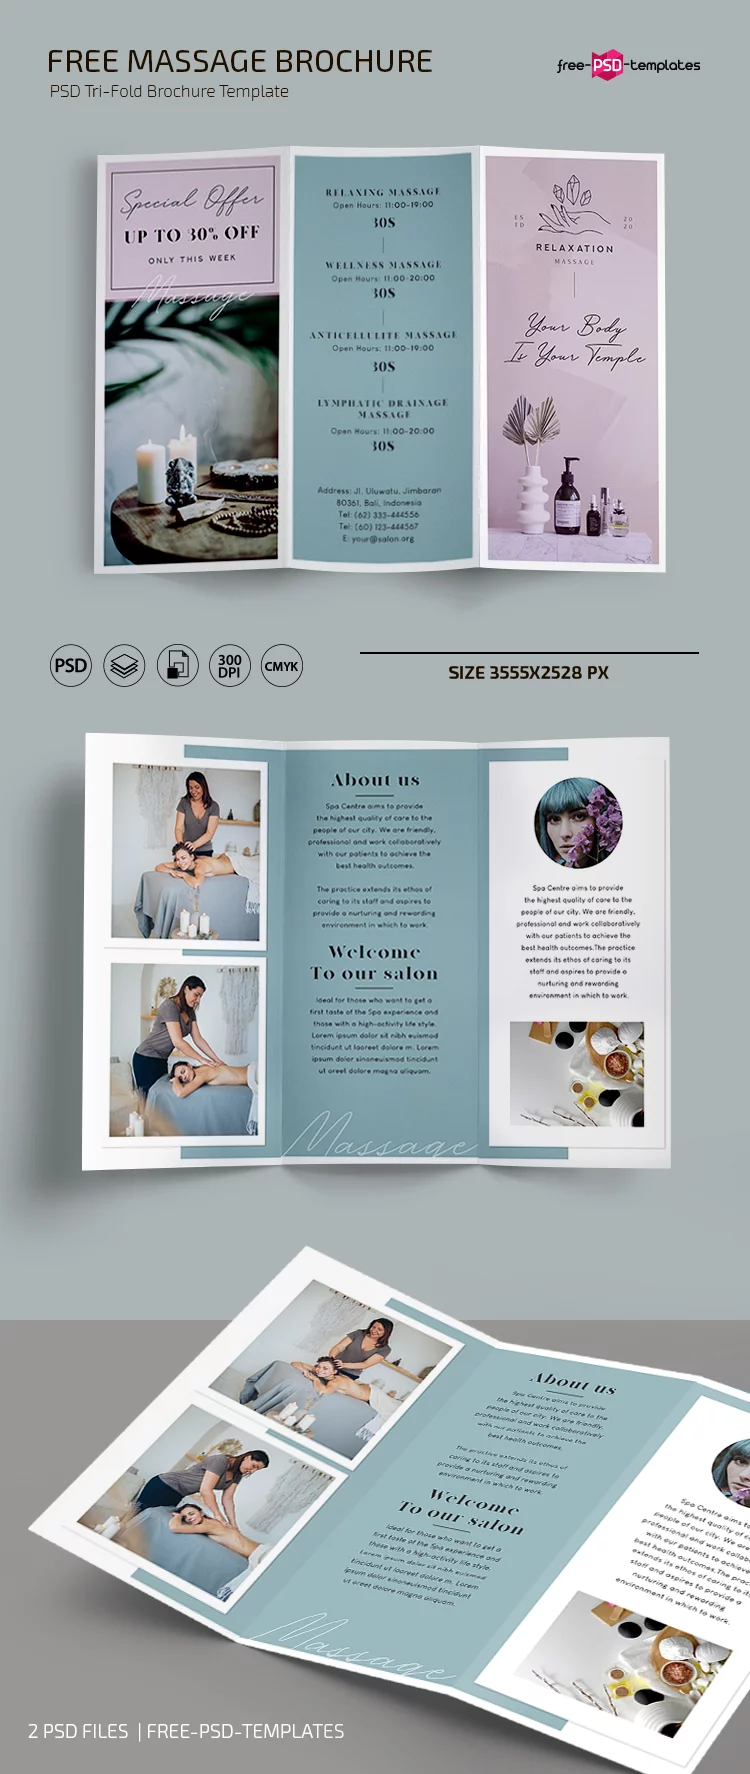 Free Massage and Spa Brochure Template  (PSD)